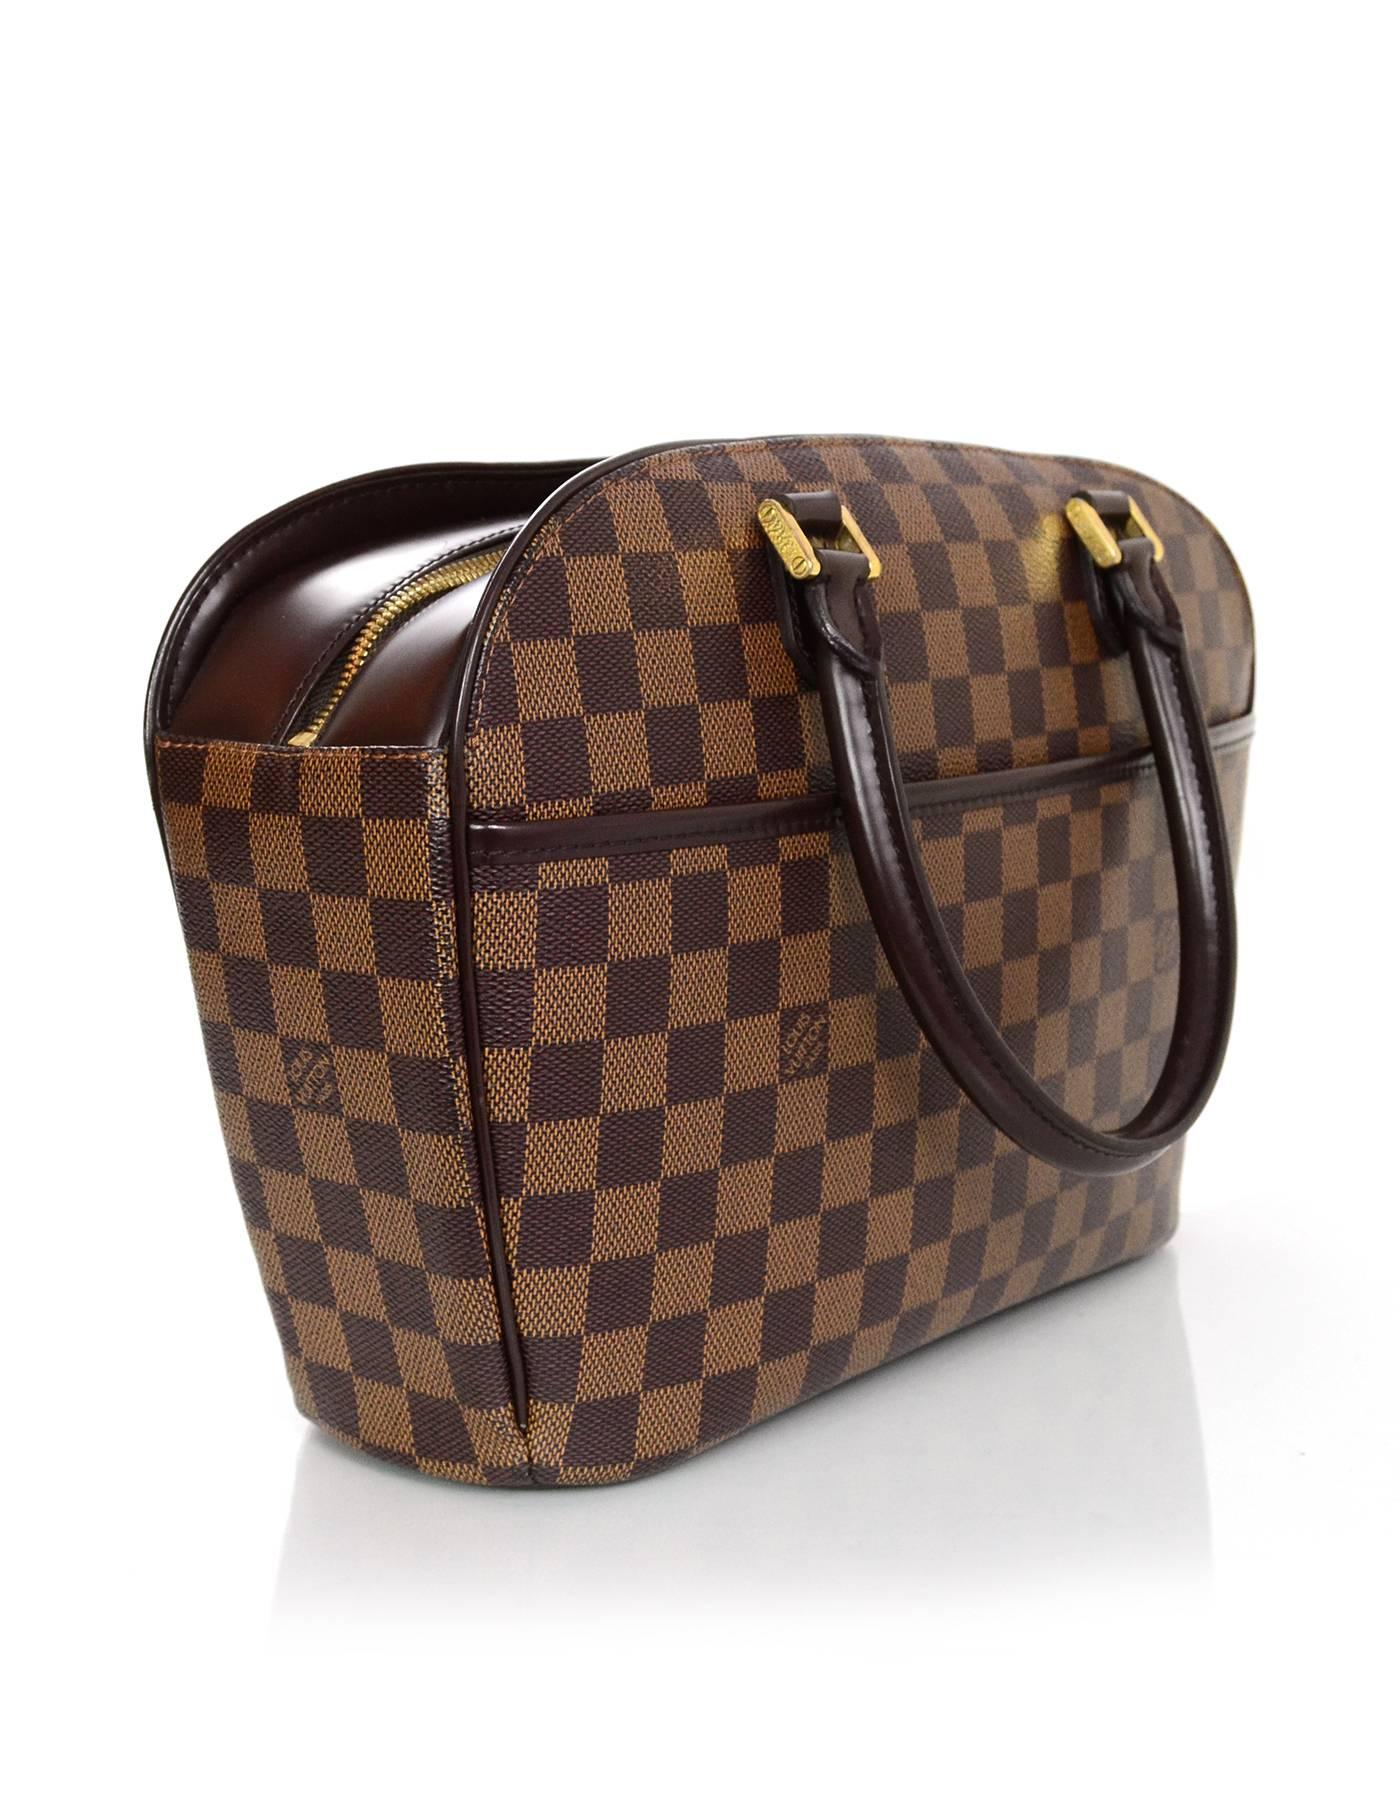 100% Authentic Louis Vuitton Damier Saria Horizontal Bag. Features all-over brown Damier print and one exterior pocket. Zip top with gold hardware, leather handles and trim. Orange textile lining with two interior pockets. Excellent pre-owned